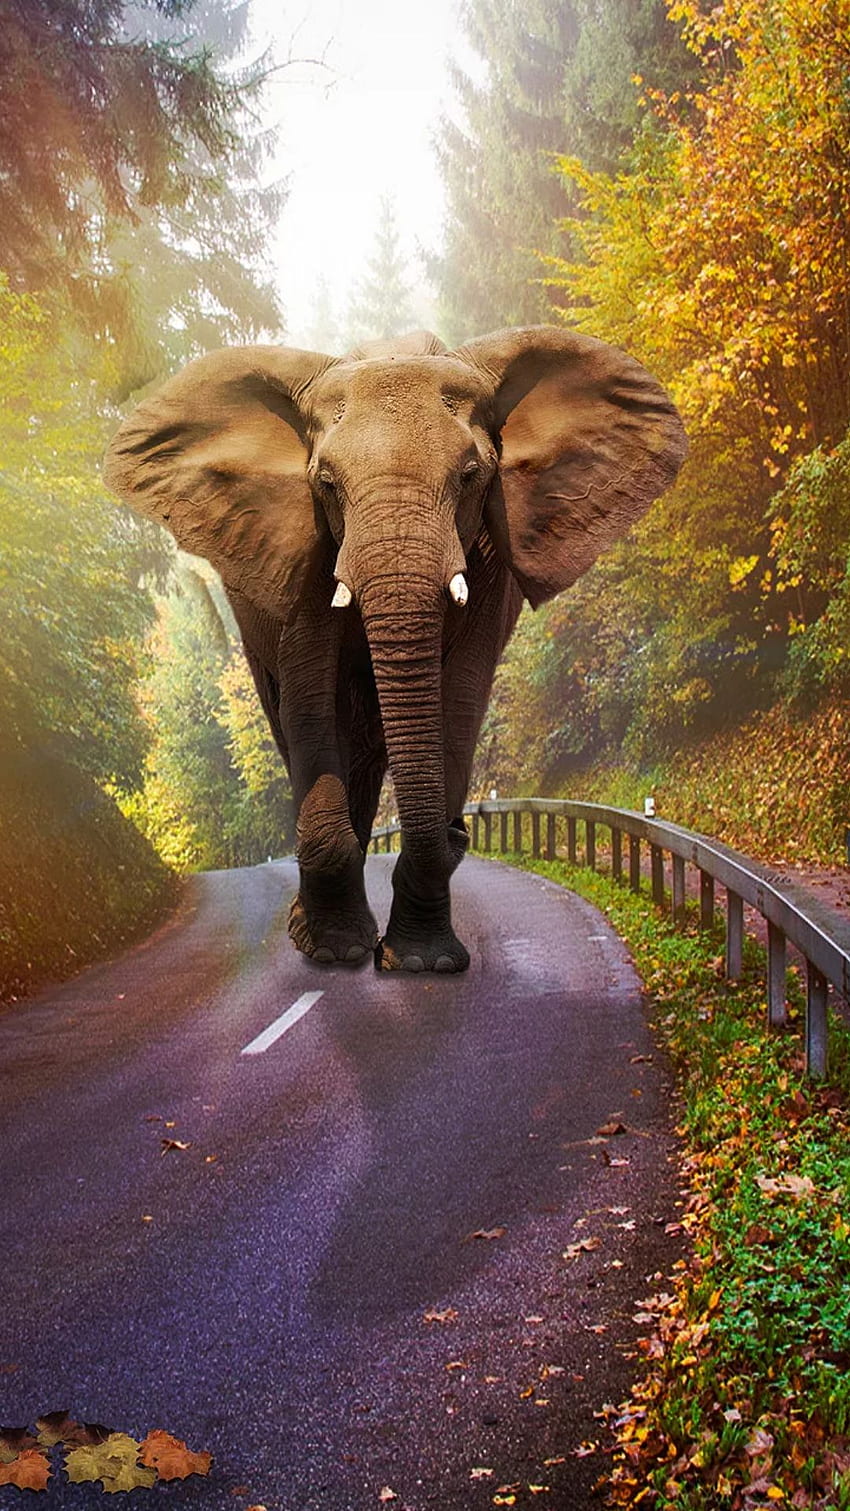 Elephant old mobile cell phone smartphone wallpapers hd desktop  backgrounds 240x320 images and pictures